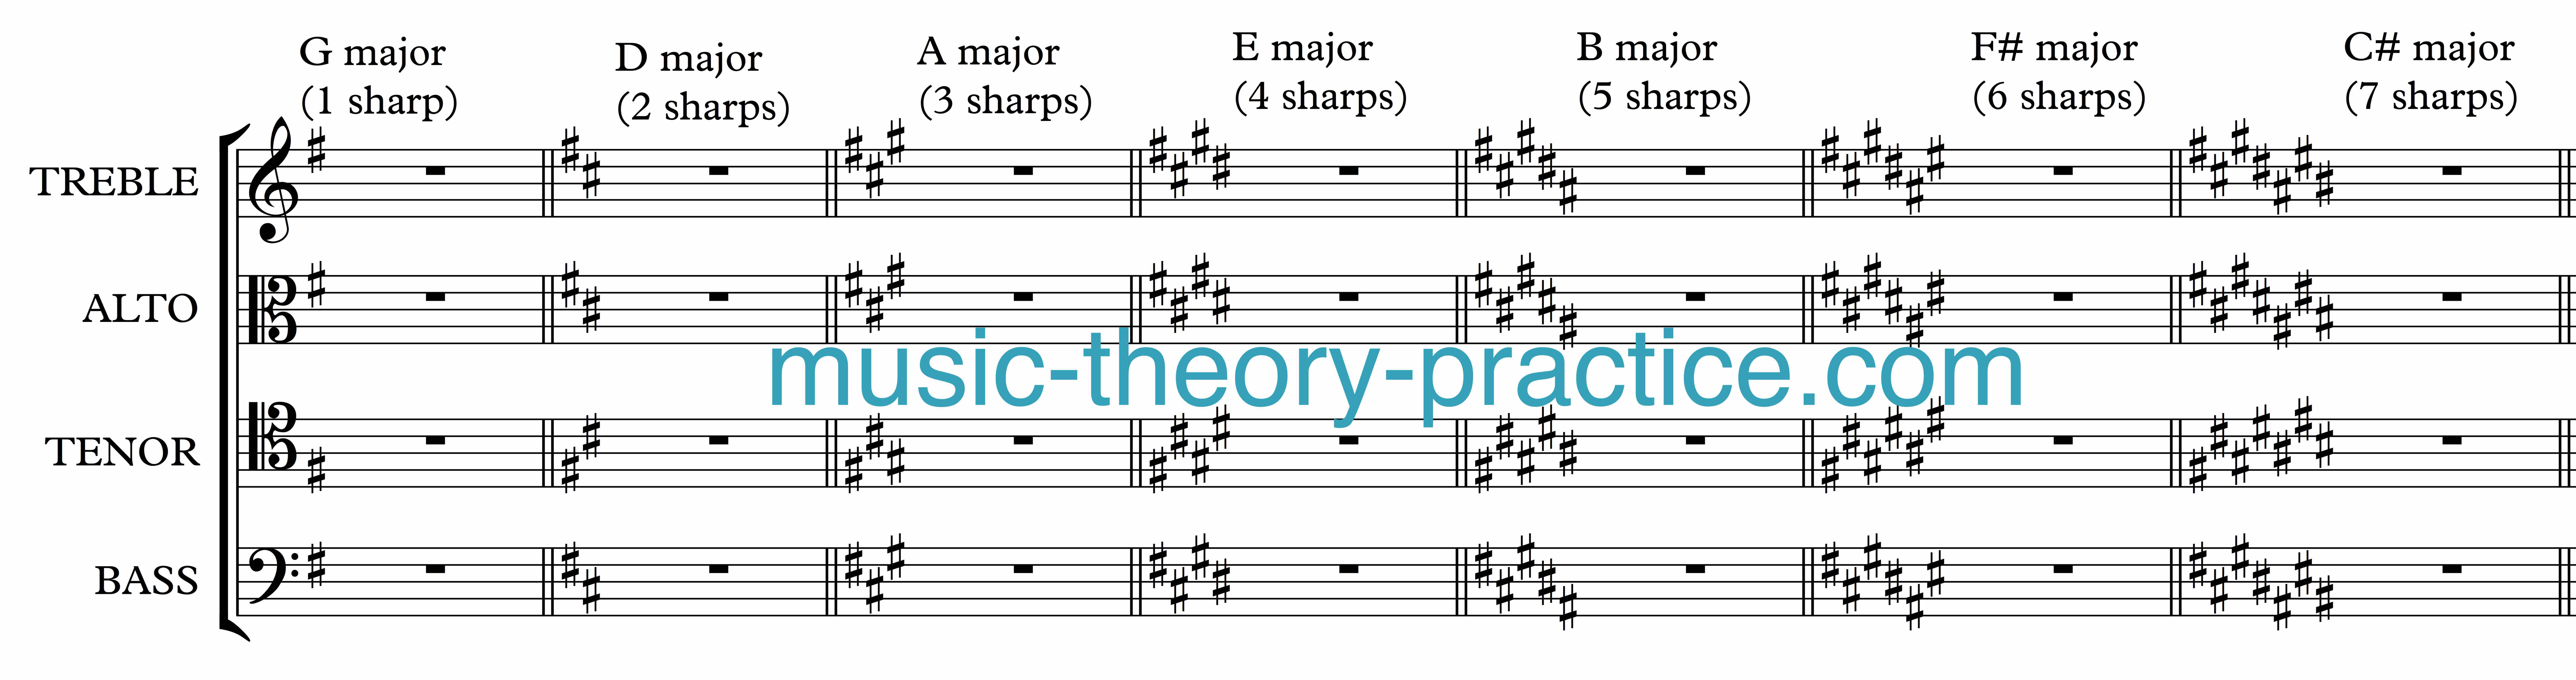 The Order Of Sharps Music Theory Practice